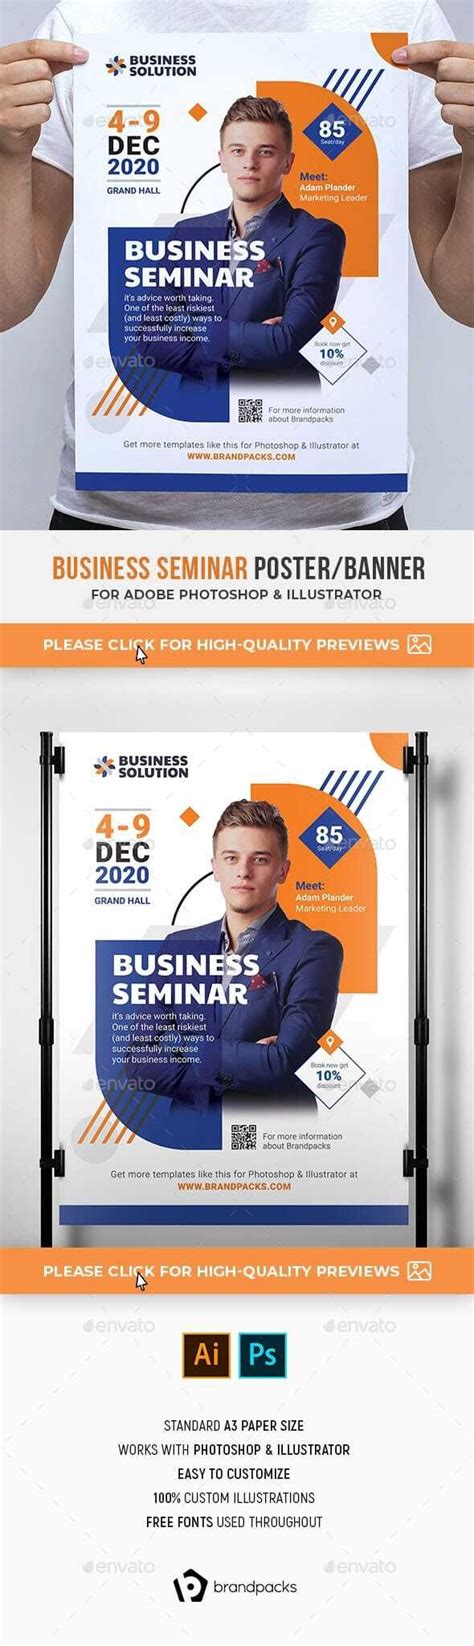 Business Seminar Posterbanner Fully Editable Psd Flyer Template A3